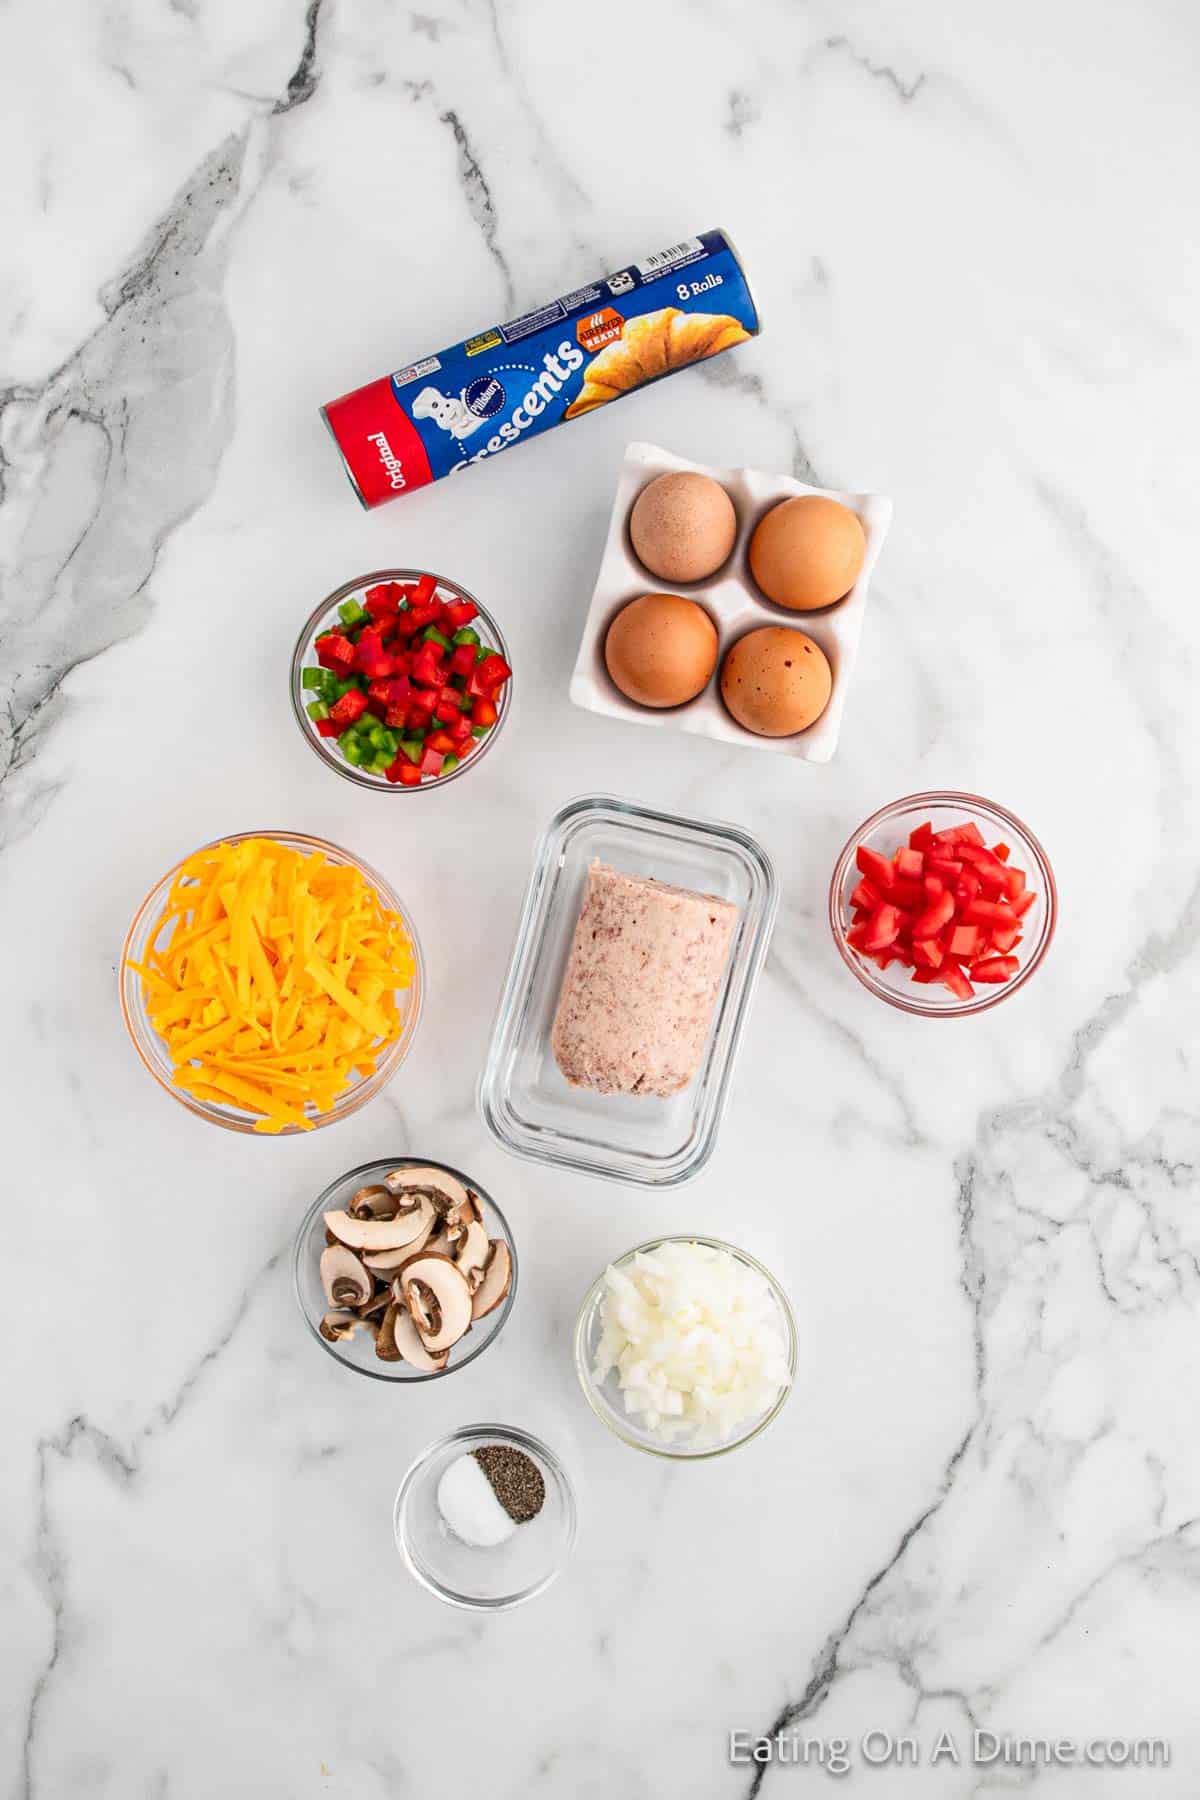 Ingredients for Crescent Roll Breakfast Pizza - Crescent Roll Dough, Breakfast sausage, eggs, salt, pepper, bell peppers, onions, mushrooms, tomatoes, cheese